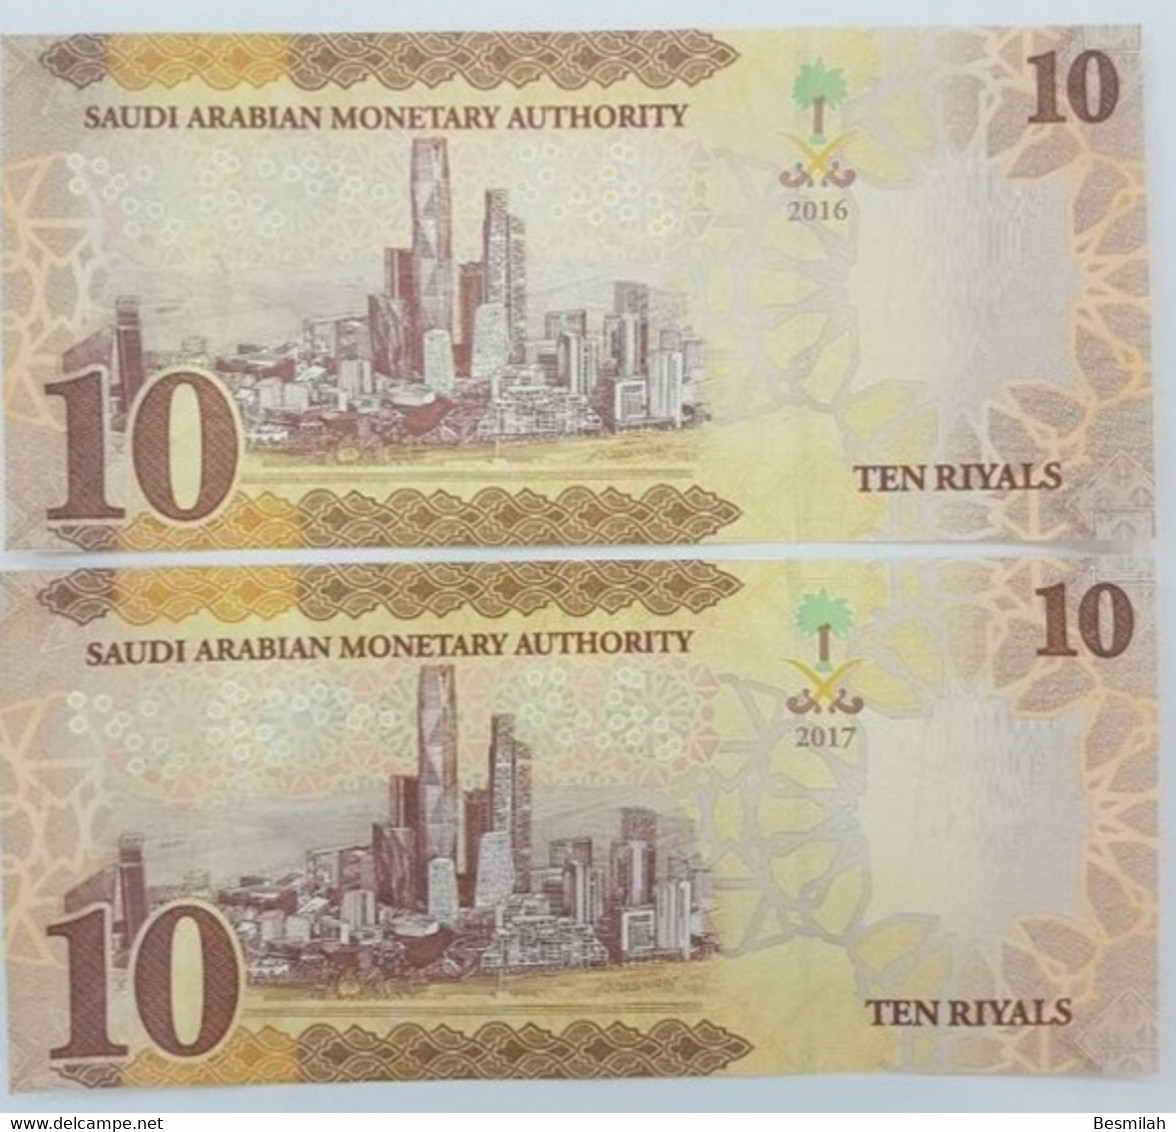 Saudi Arabia 10 Riyals 2016 And 2017 P-39 A P-39 B 20 Notes 10 Of Each Date UNC Condition From A Bundle - Arabie Saoudite